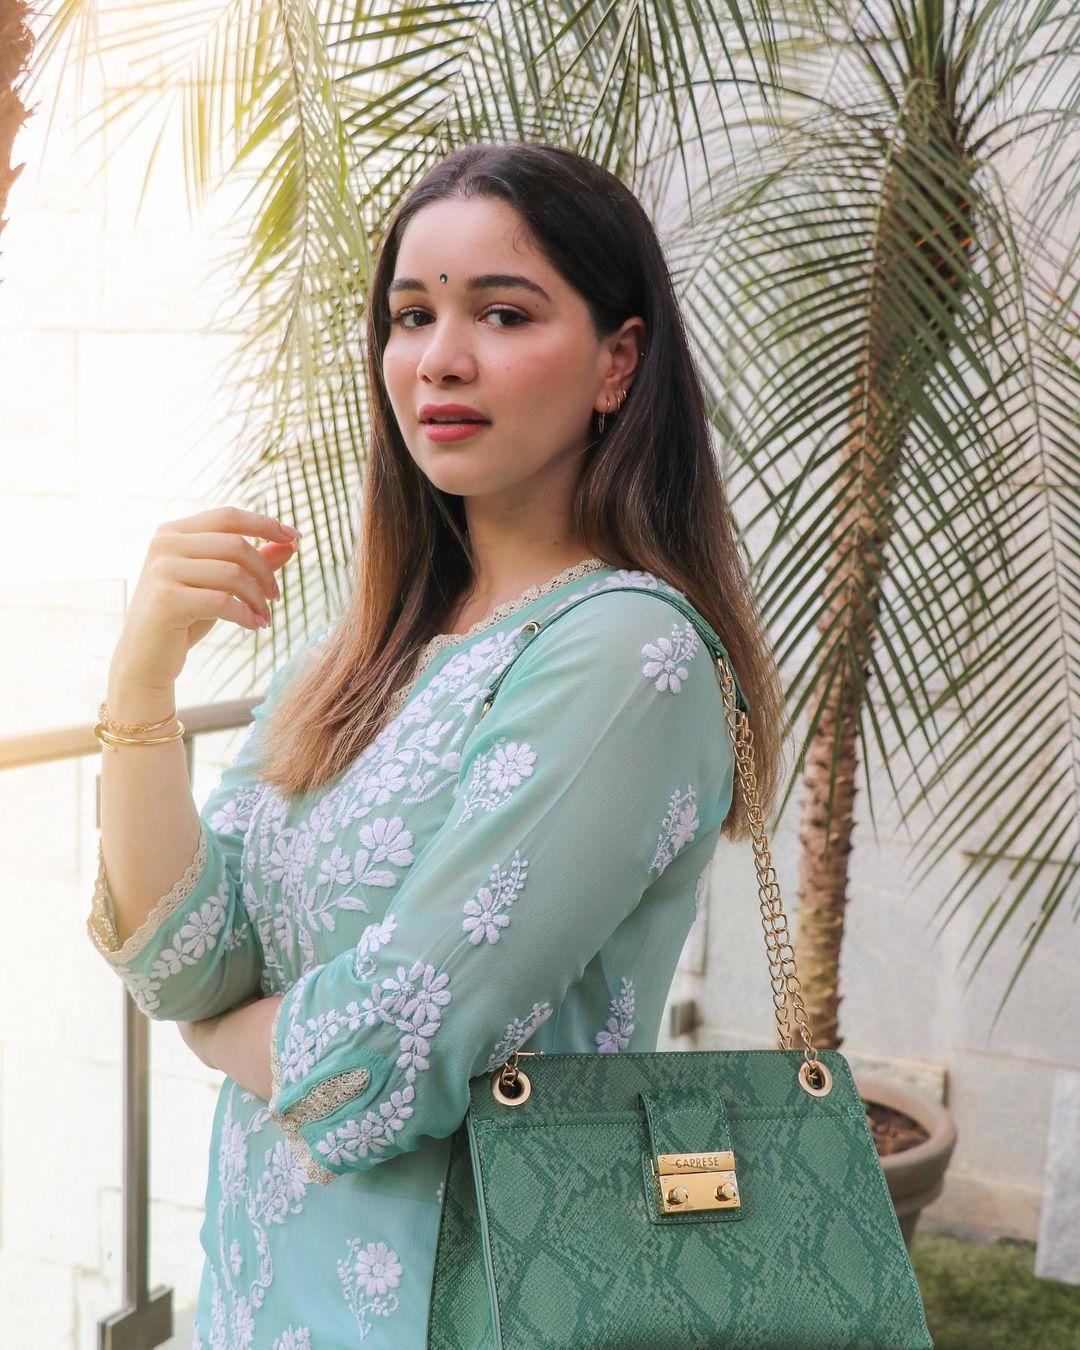 Sara Tendulkar rocked a blue chikankari kurta, the epitome of summer style. Its light and airy fabric made it perfect for beating the summer heat while staying fashionable.